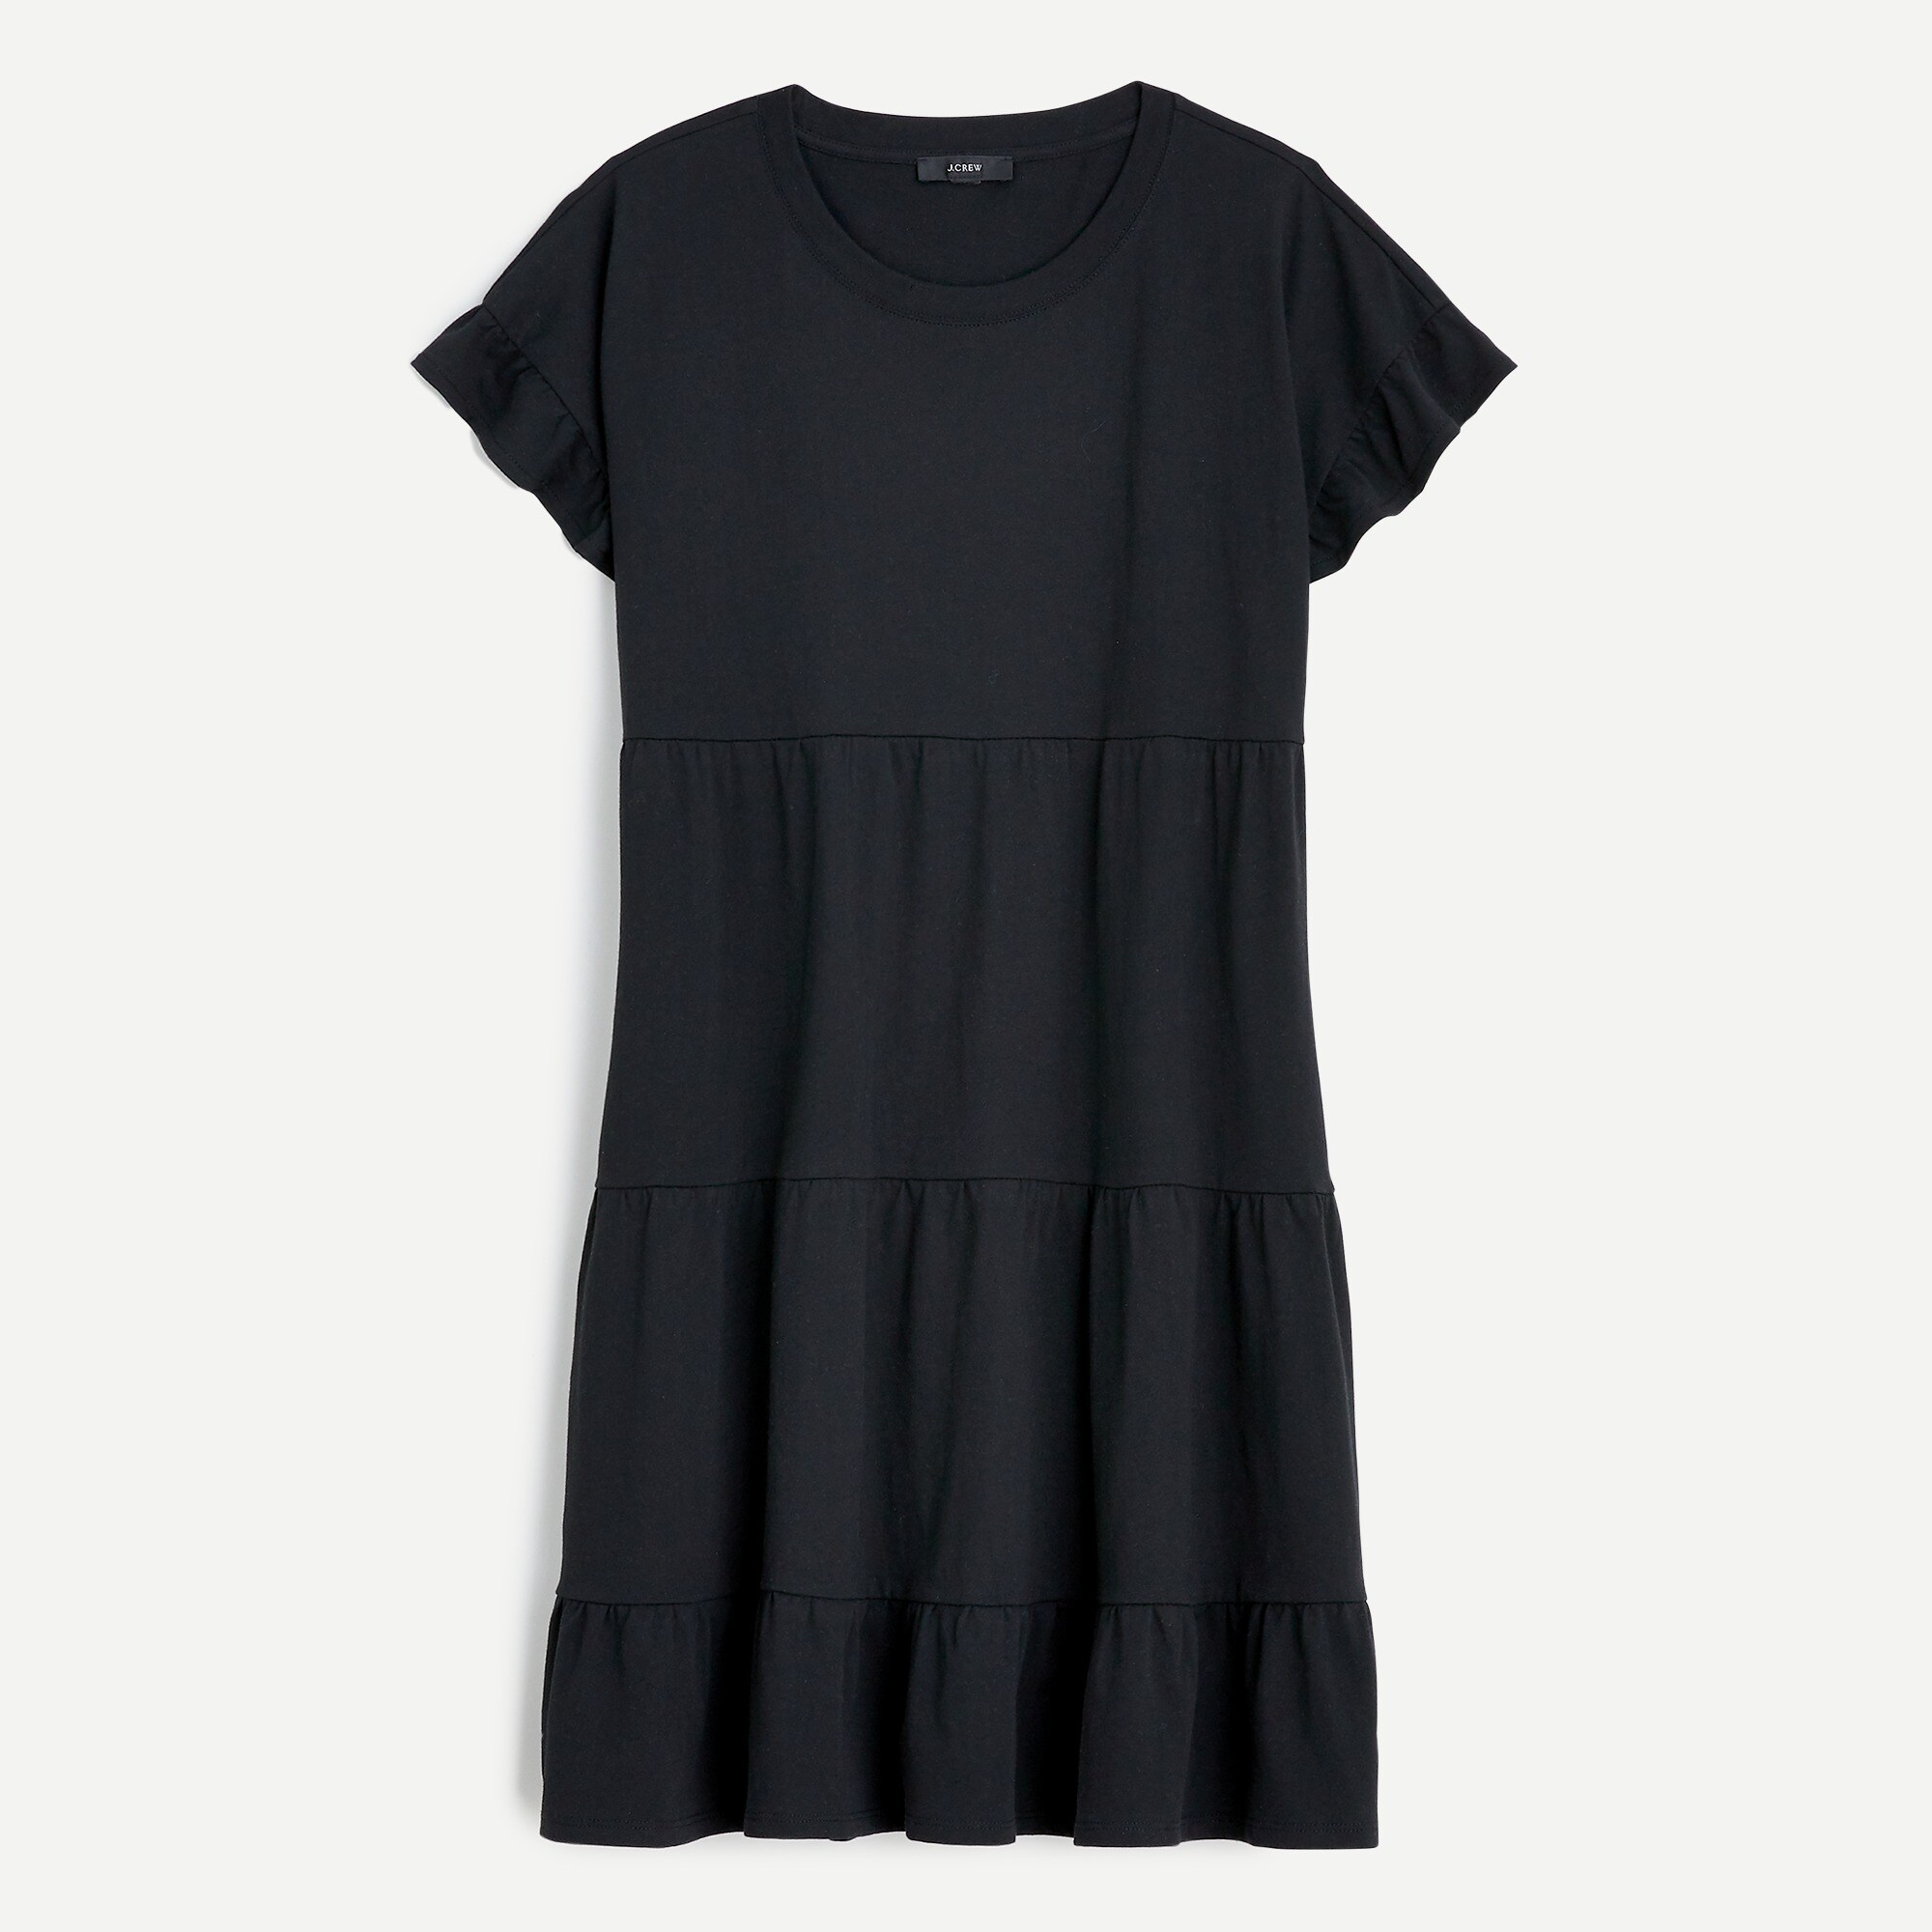 J.Crew: Swingy Tiered Jersey Dress For 